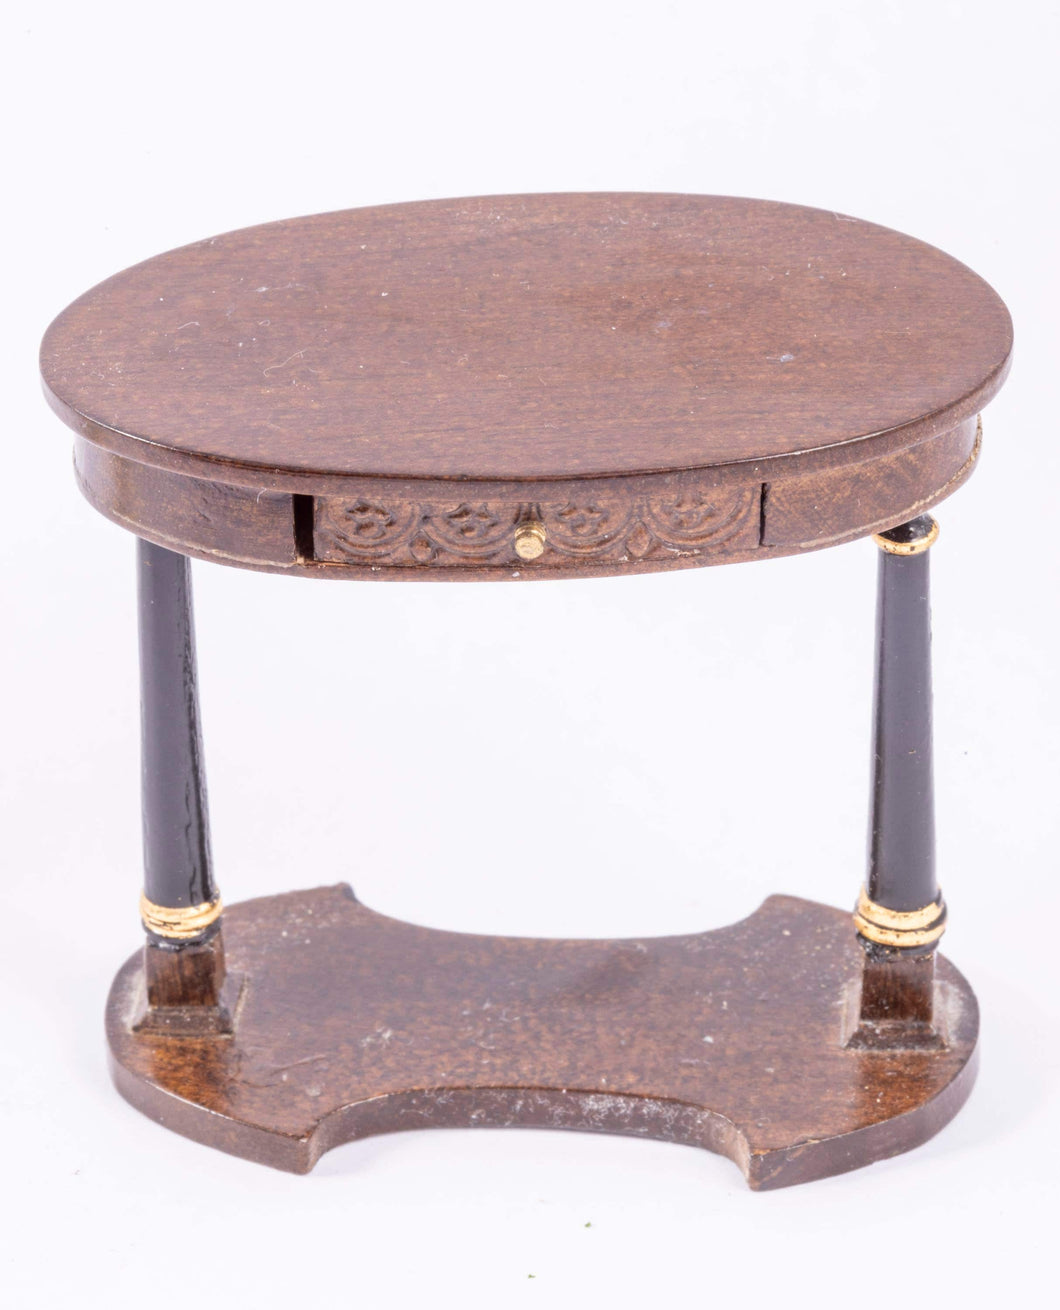 Dollhouse Miniature ~ Bespaq Oval Table with Drawe, Repaired, From Lee Lefkowitz Collection